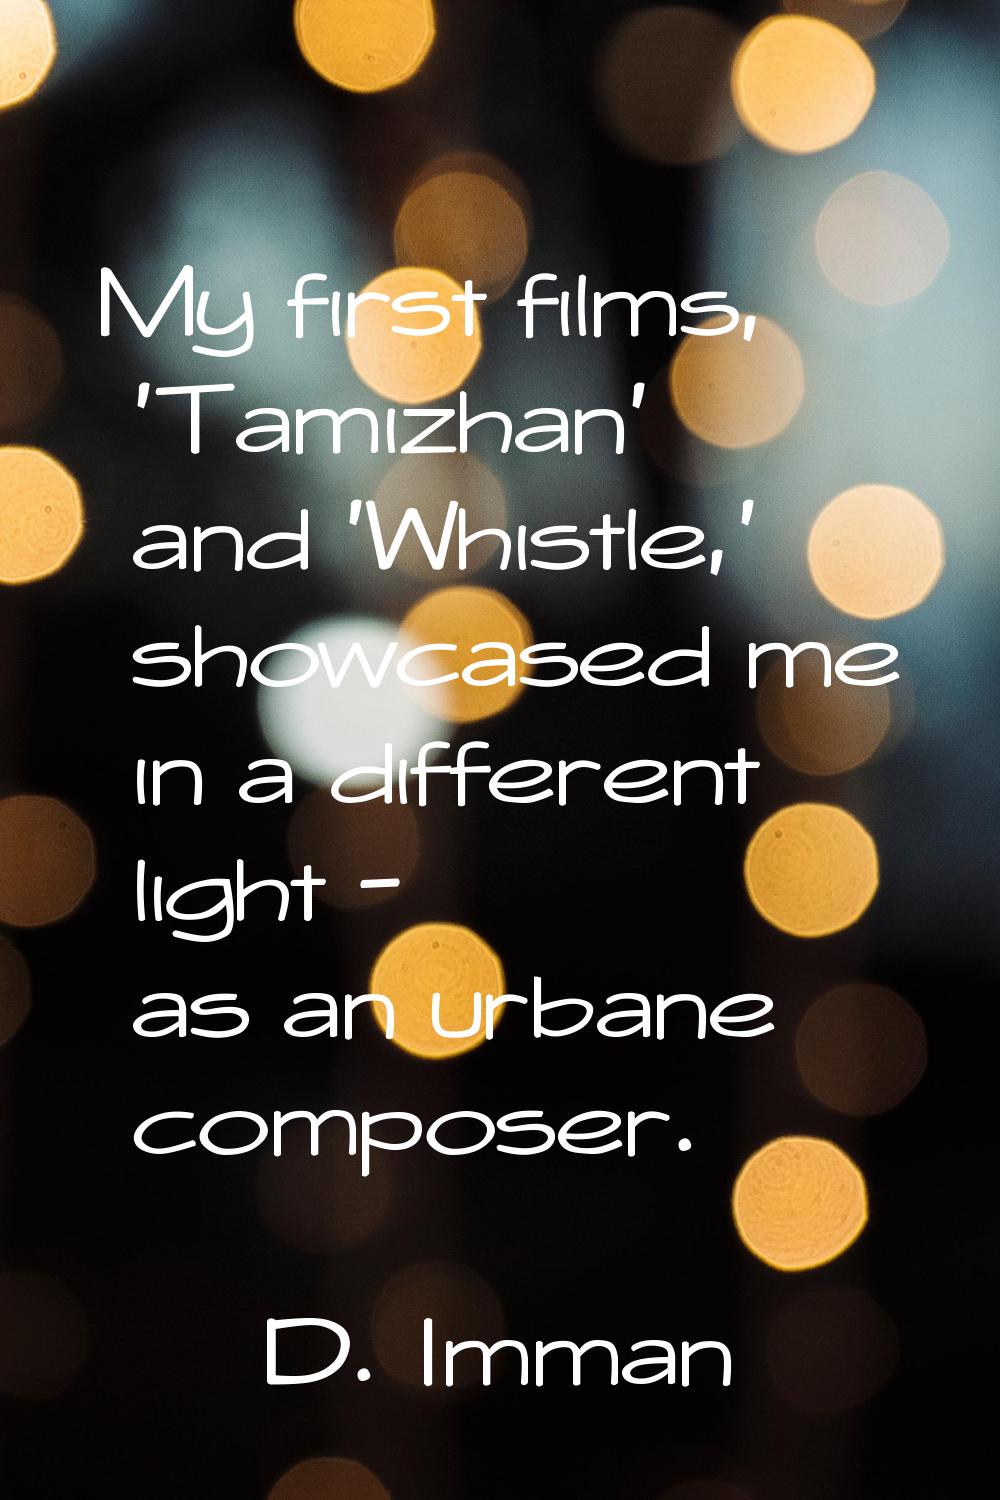 My first films, 'Tamizhan' and 'Whistle,' showcased me in a different light - as an urbane composer